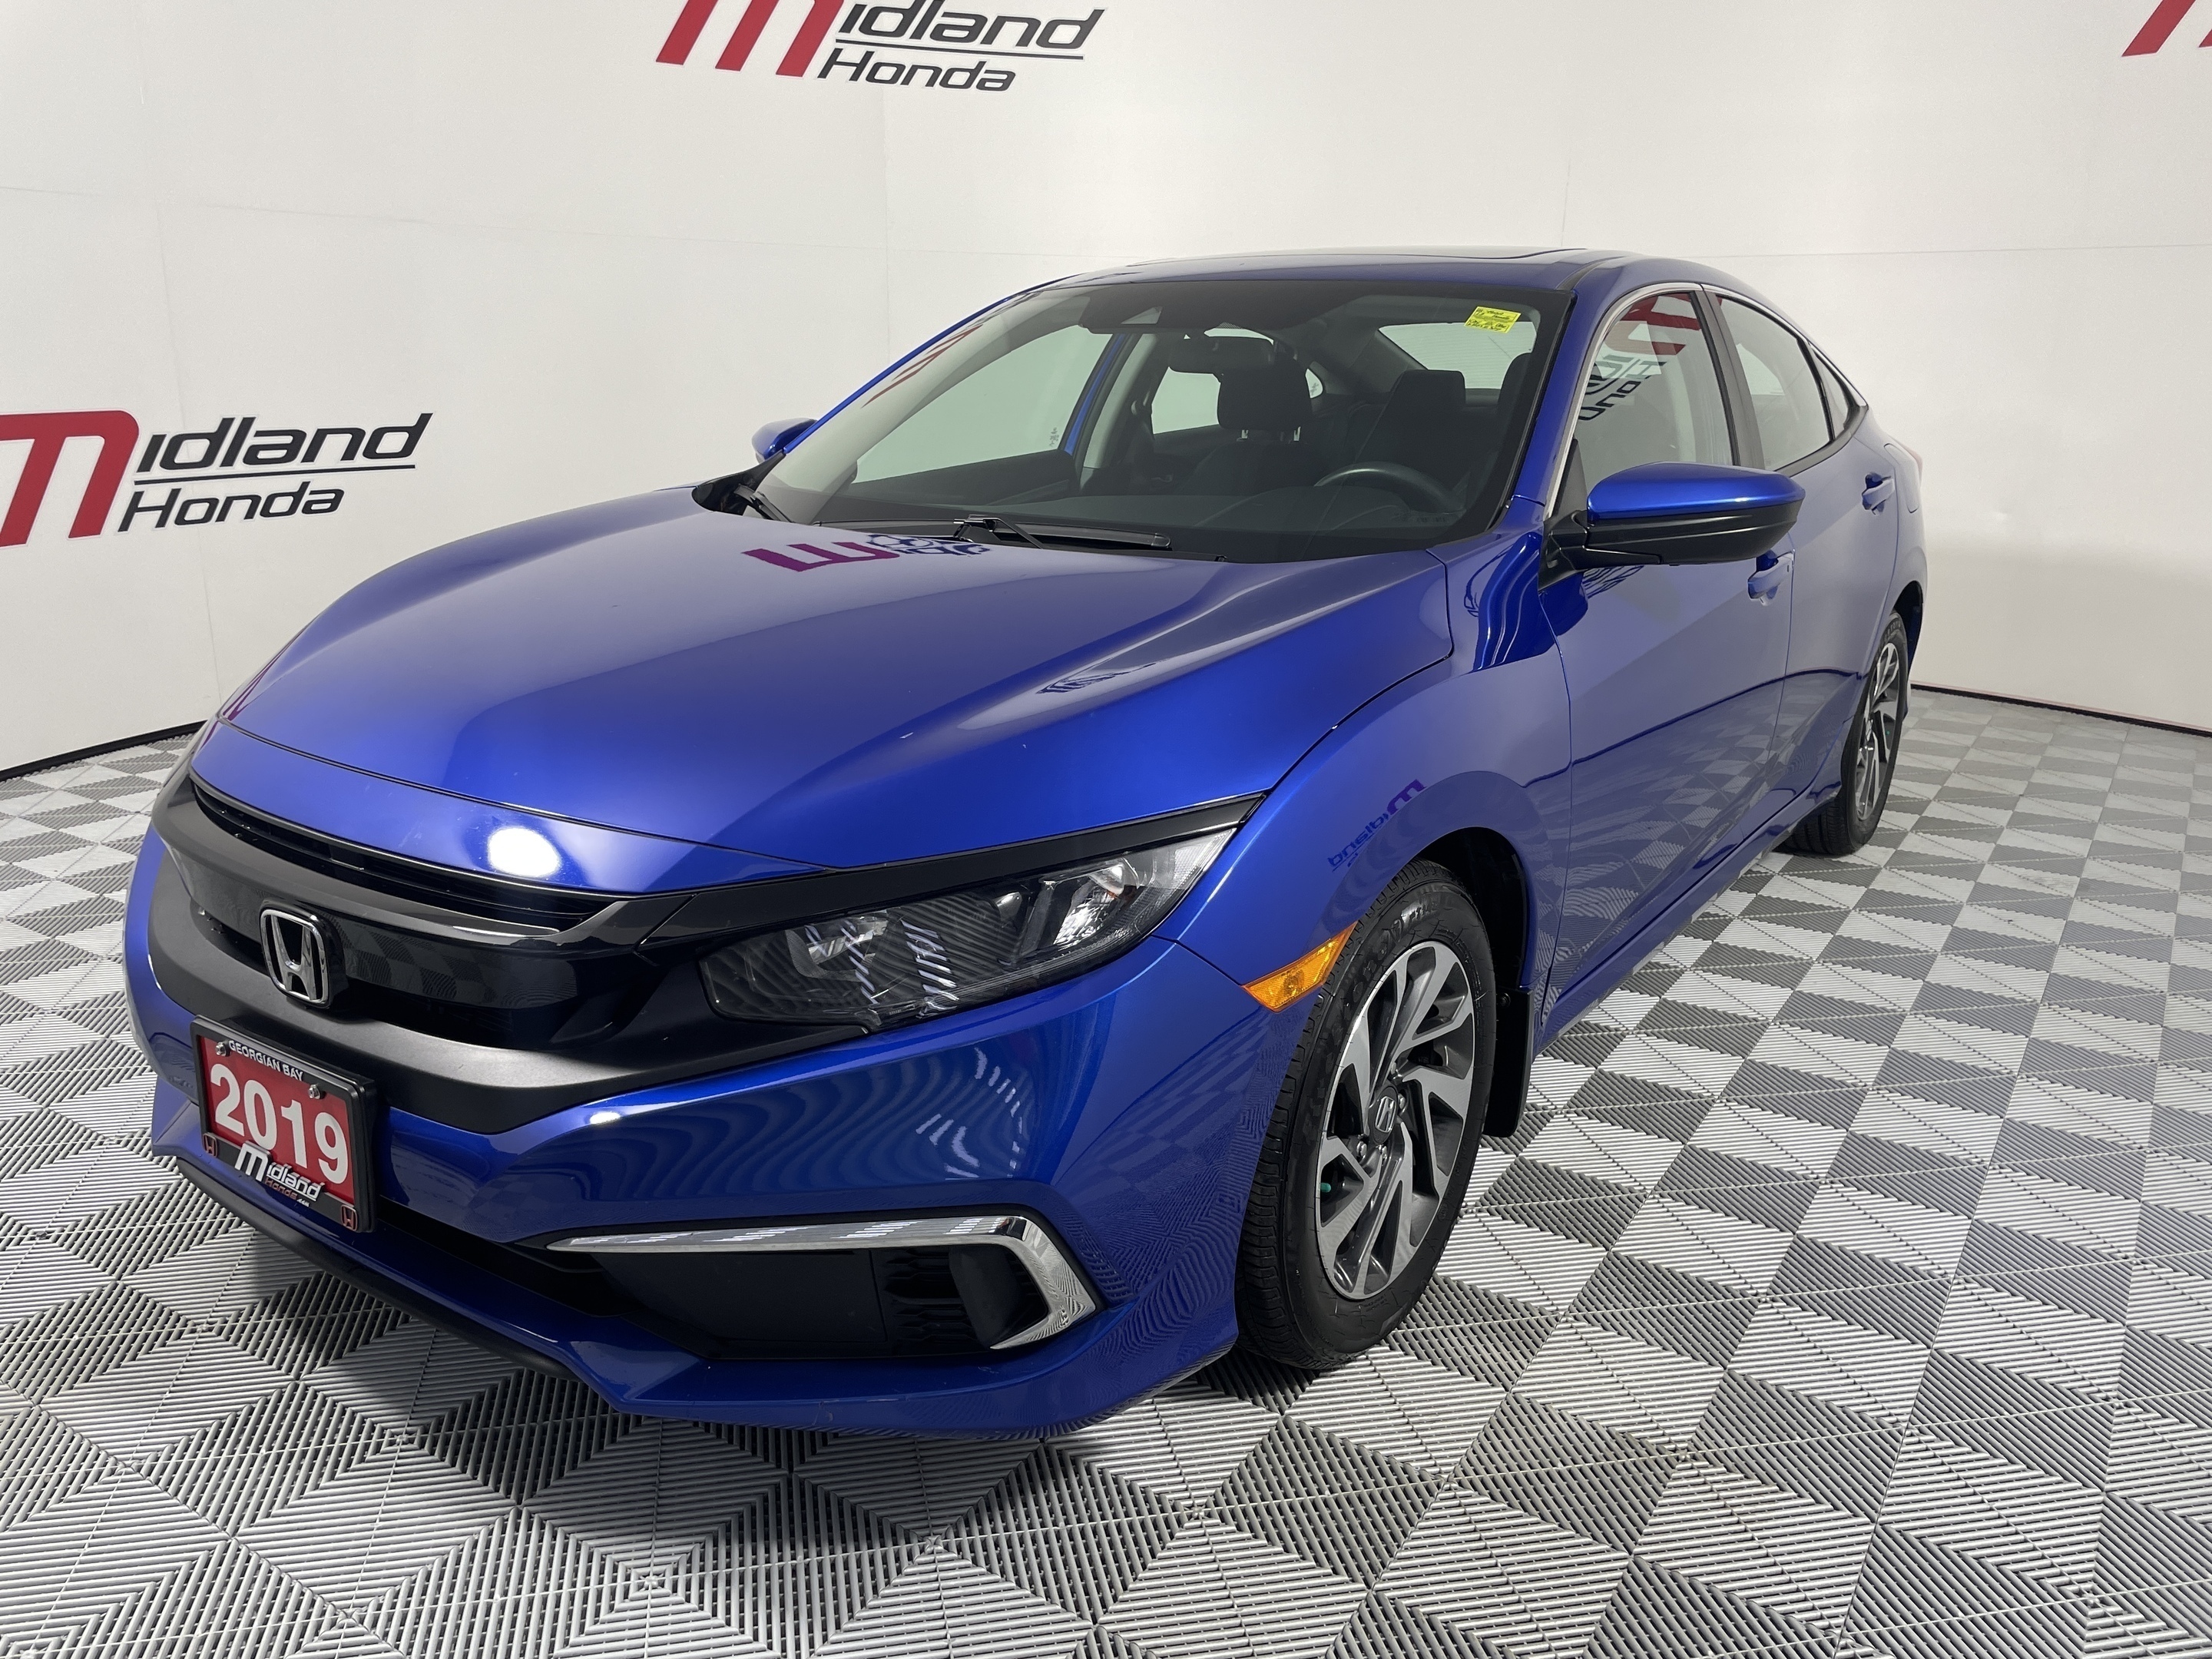 2019 Honda Civic EX | 1 Owner Accident Free | Android/Apple